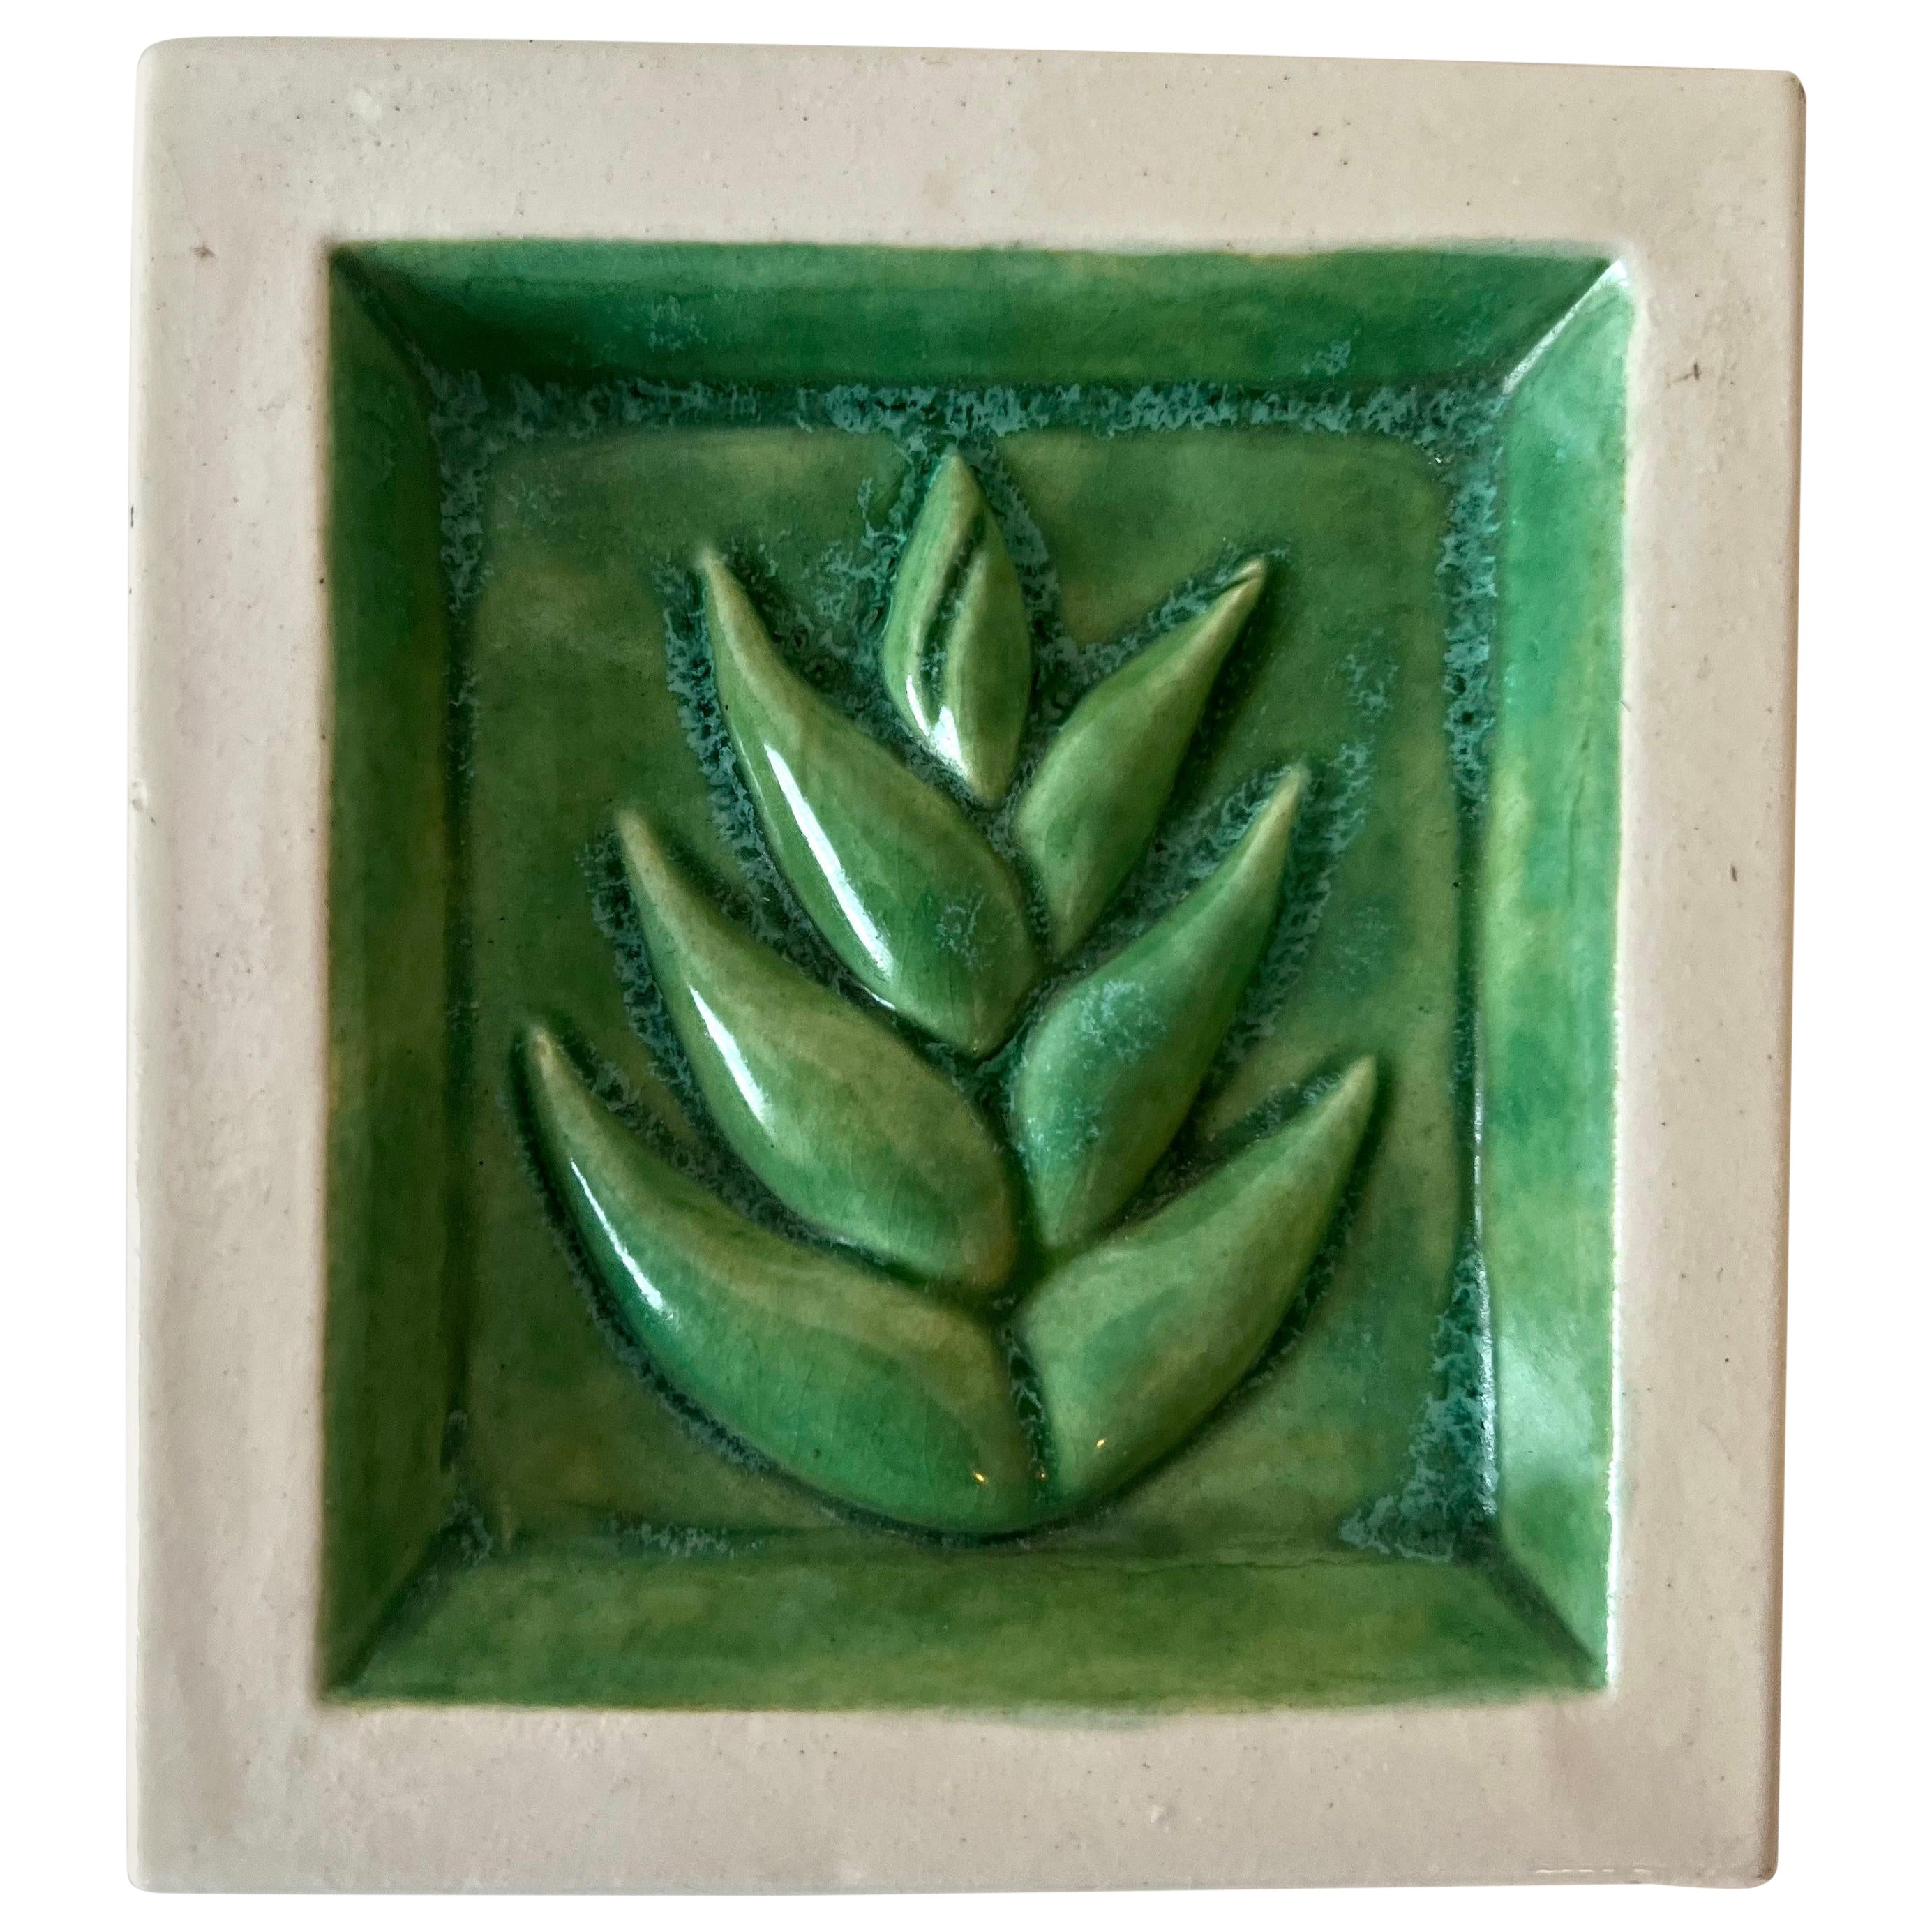 Terracotta Tile Bowl with Green Leaf